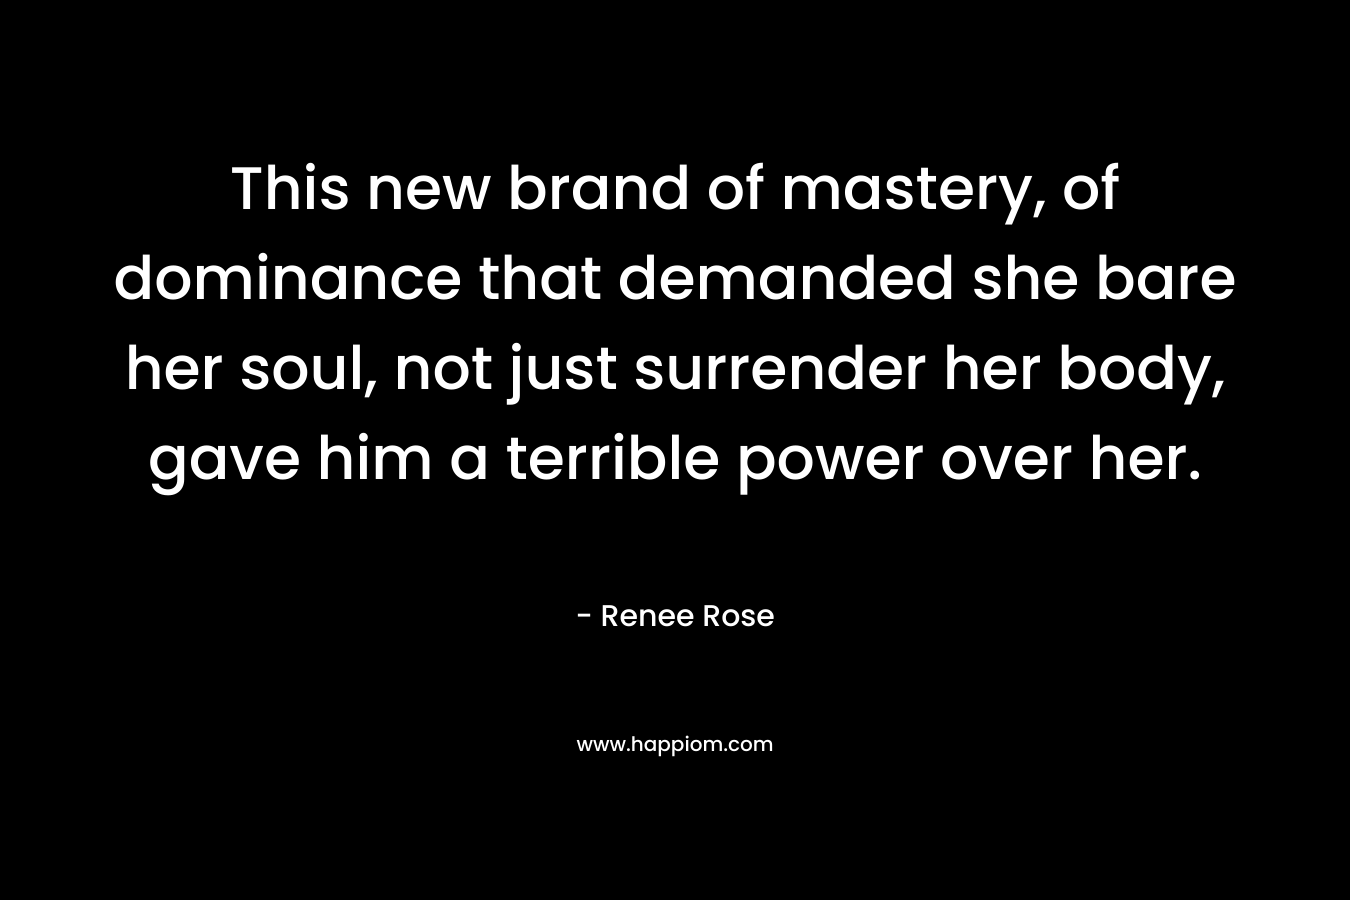 This new brand of mastery, of dominance that demanded she bare her soul, not just surrender her body, gave him a terrible power over her.